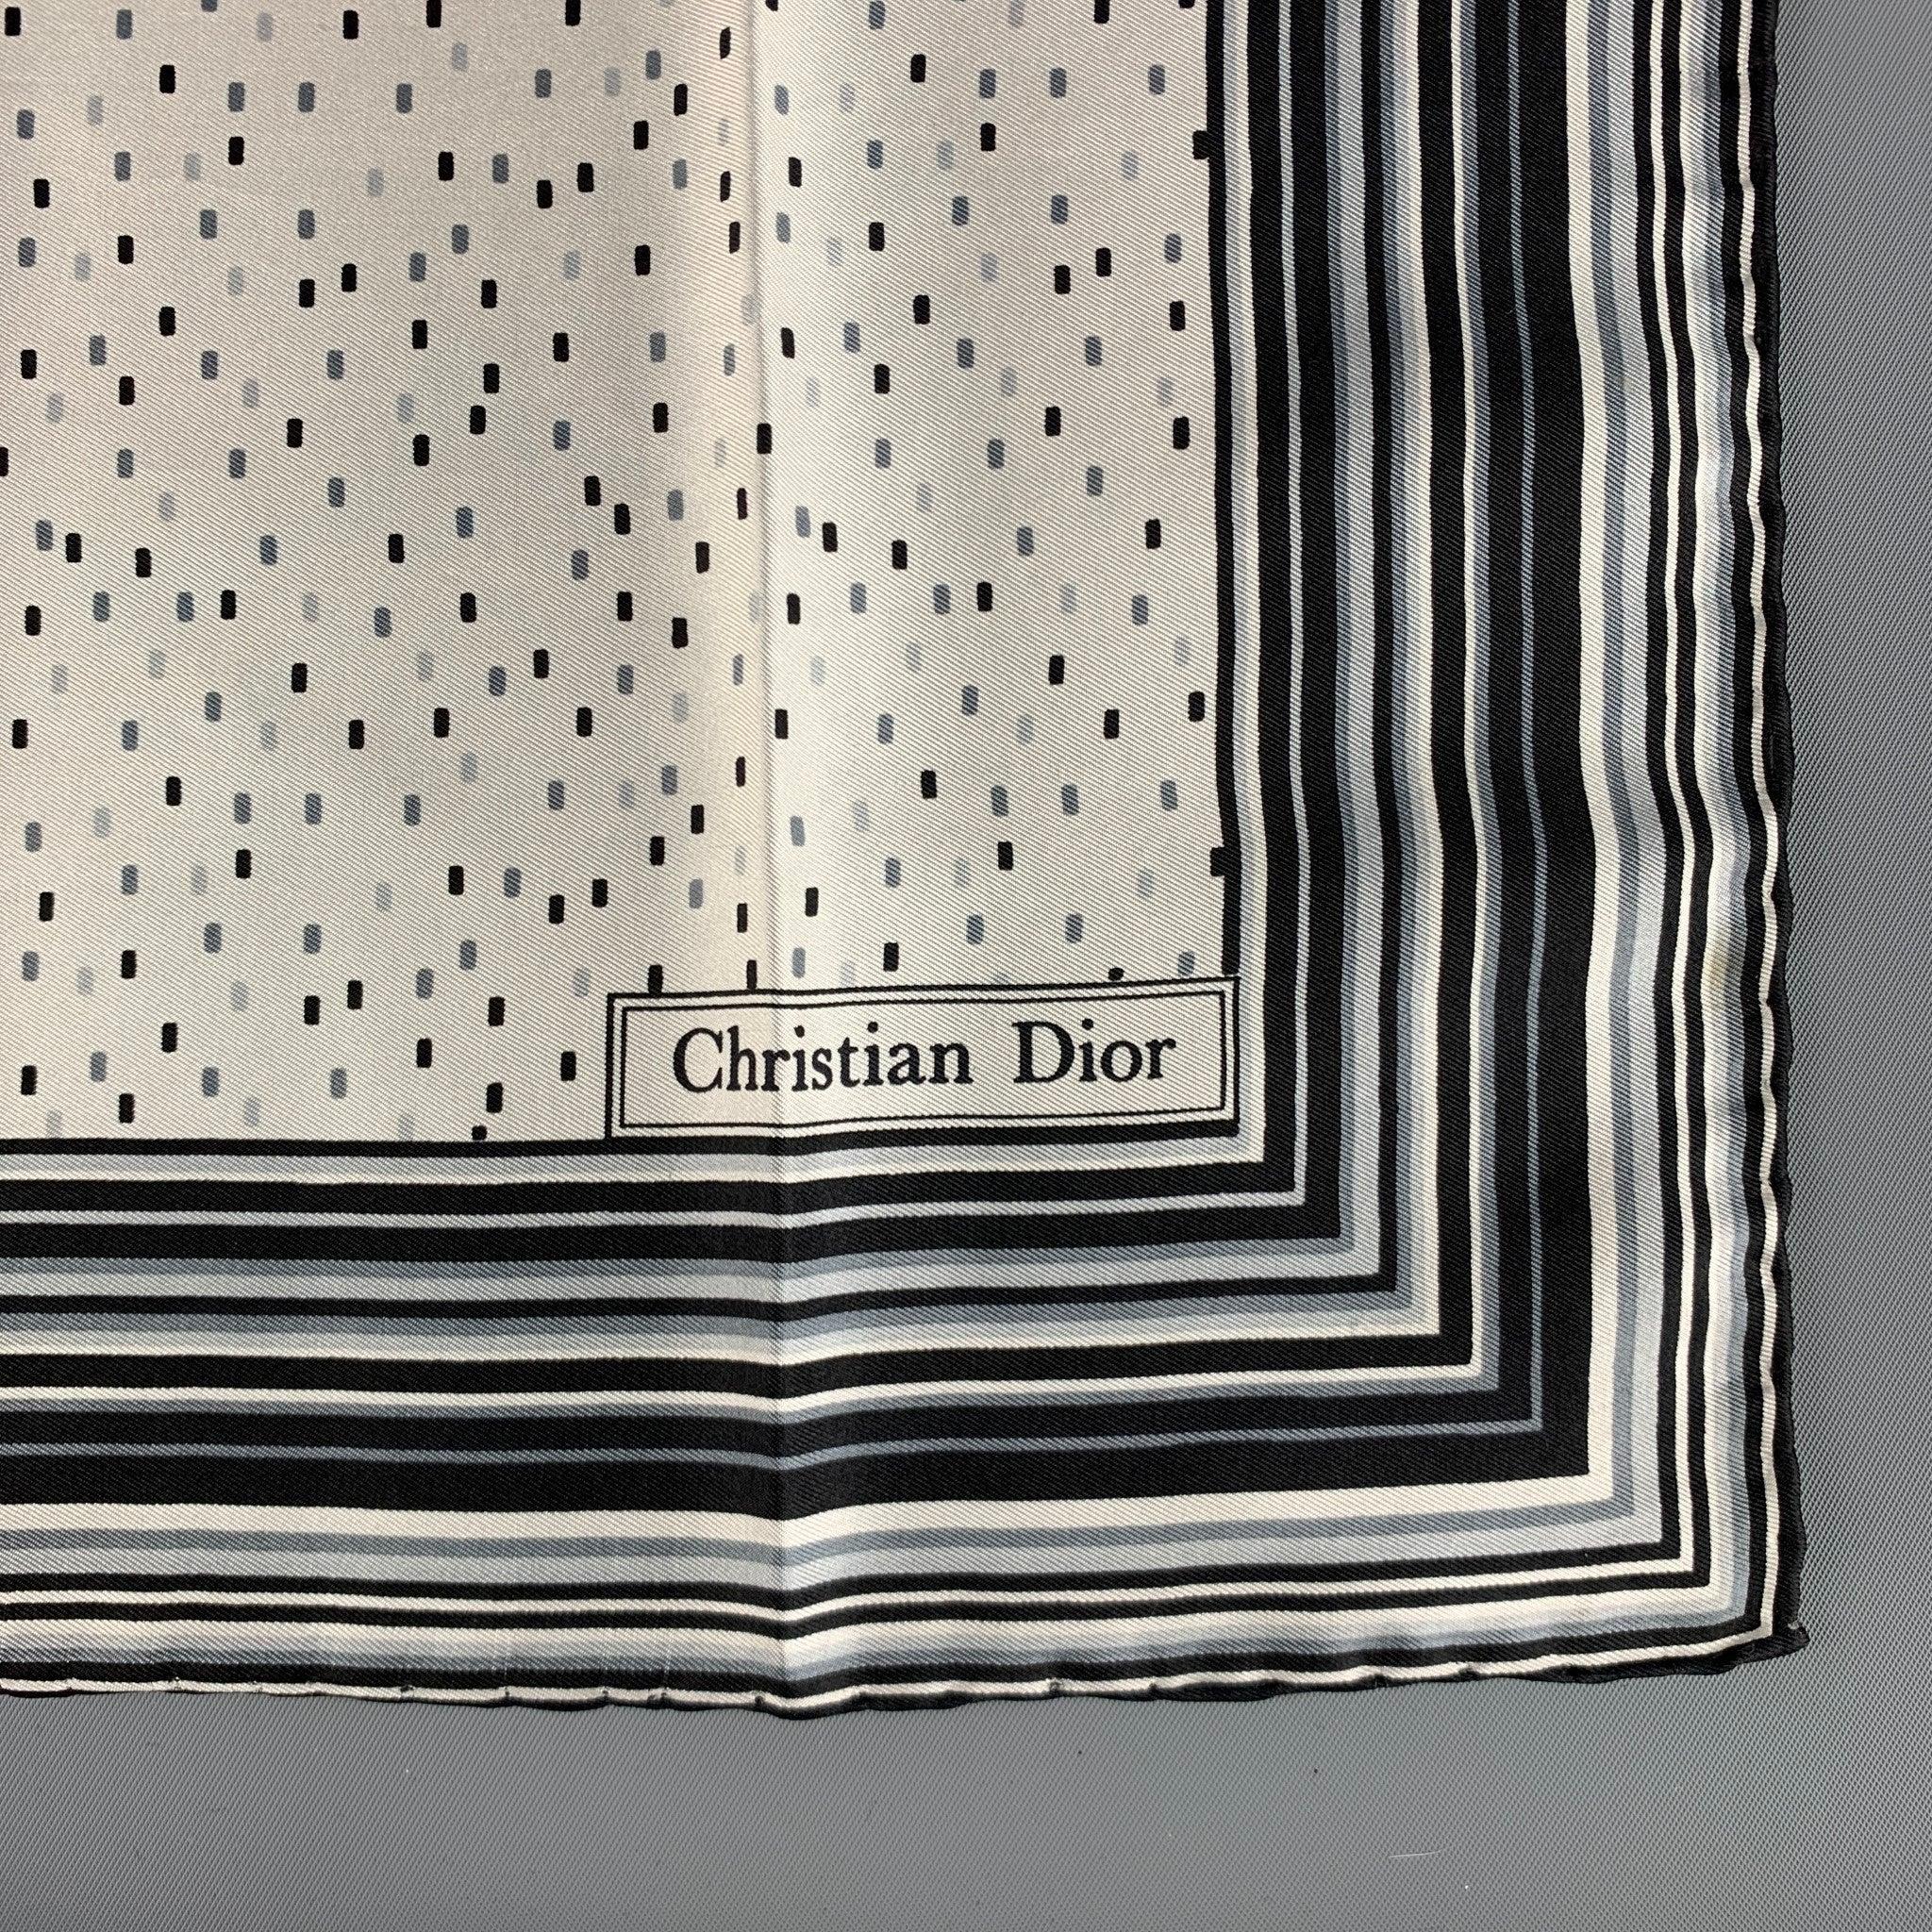 CHRISTIAN DIOR pocket square comes in cream with black stripes & dots, featuring a hand rolled hem.
Excellent Pre-Owned Condition. 

Measurements: 
   18 inches  x 18 inches 

  
  
 
Reference: 125447
Category: Pocket Square
More Details
   